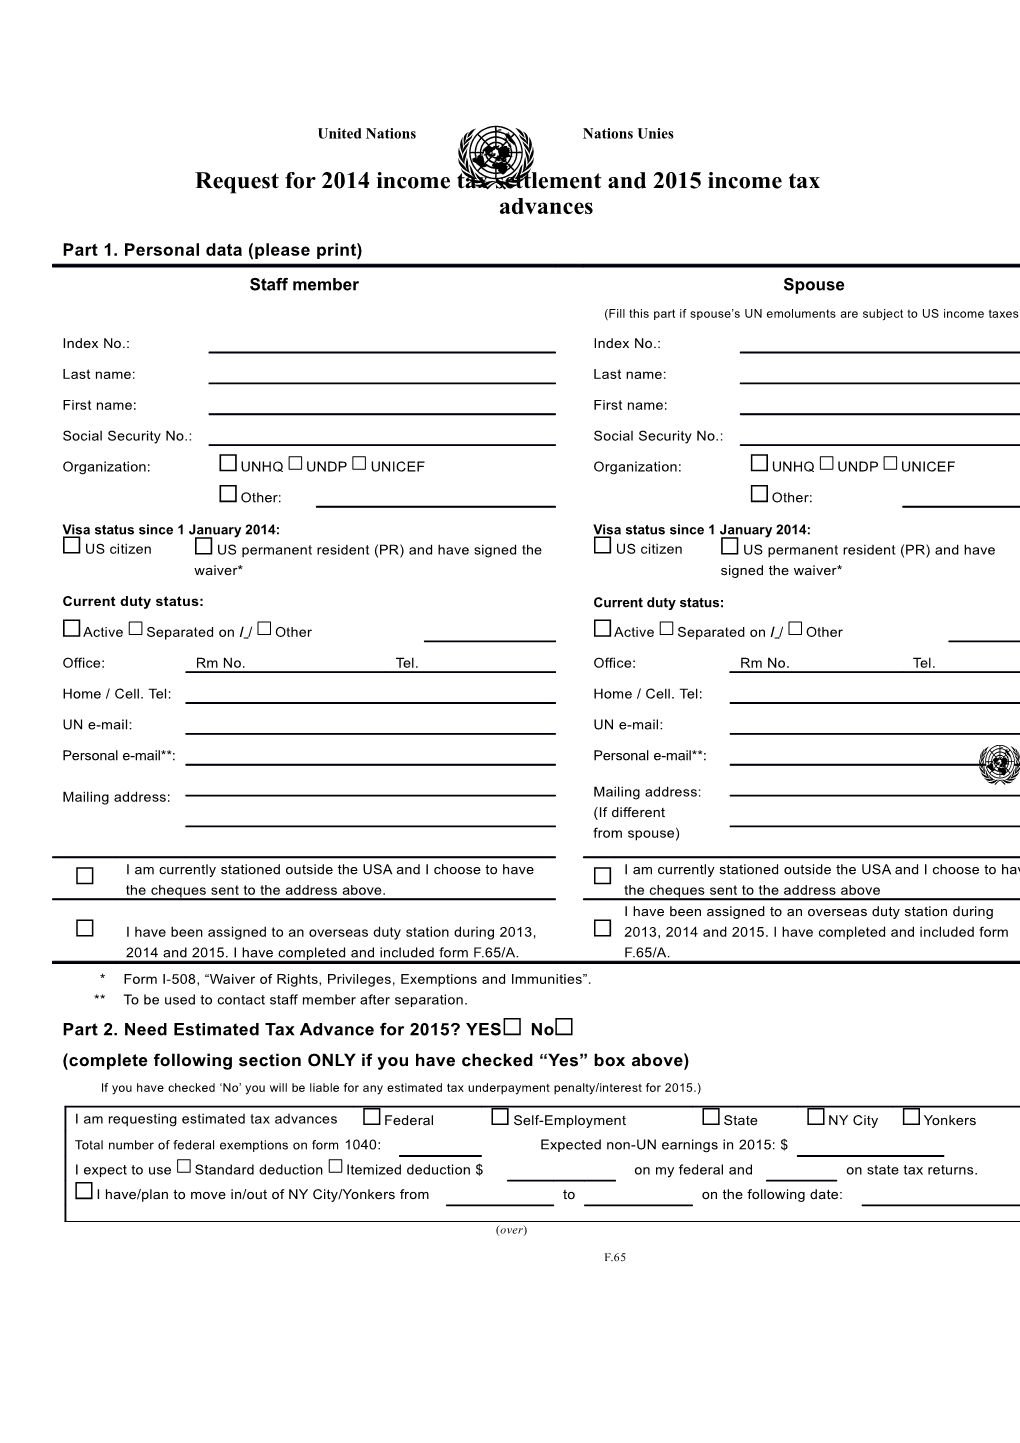 Request for 2014 Income Tax Settlement and 2015 Income Tax Advances